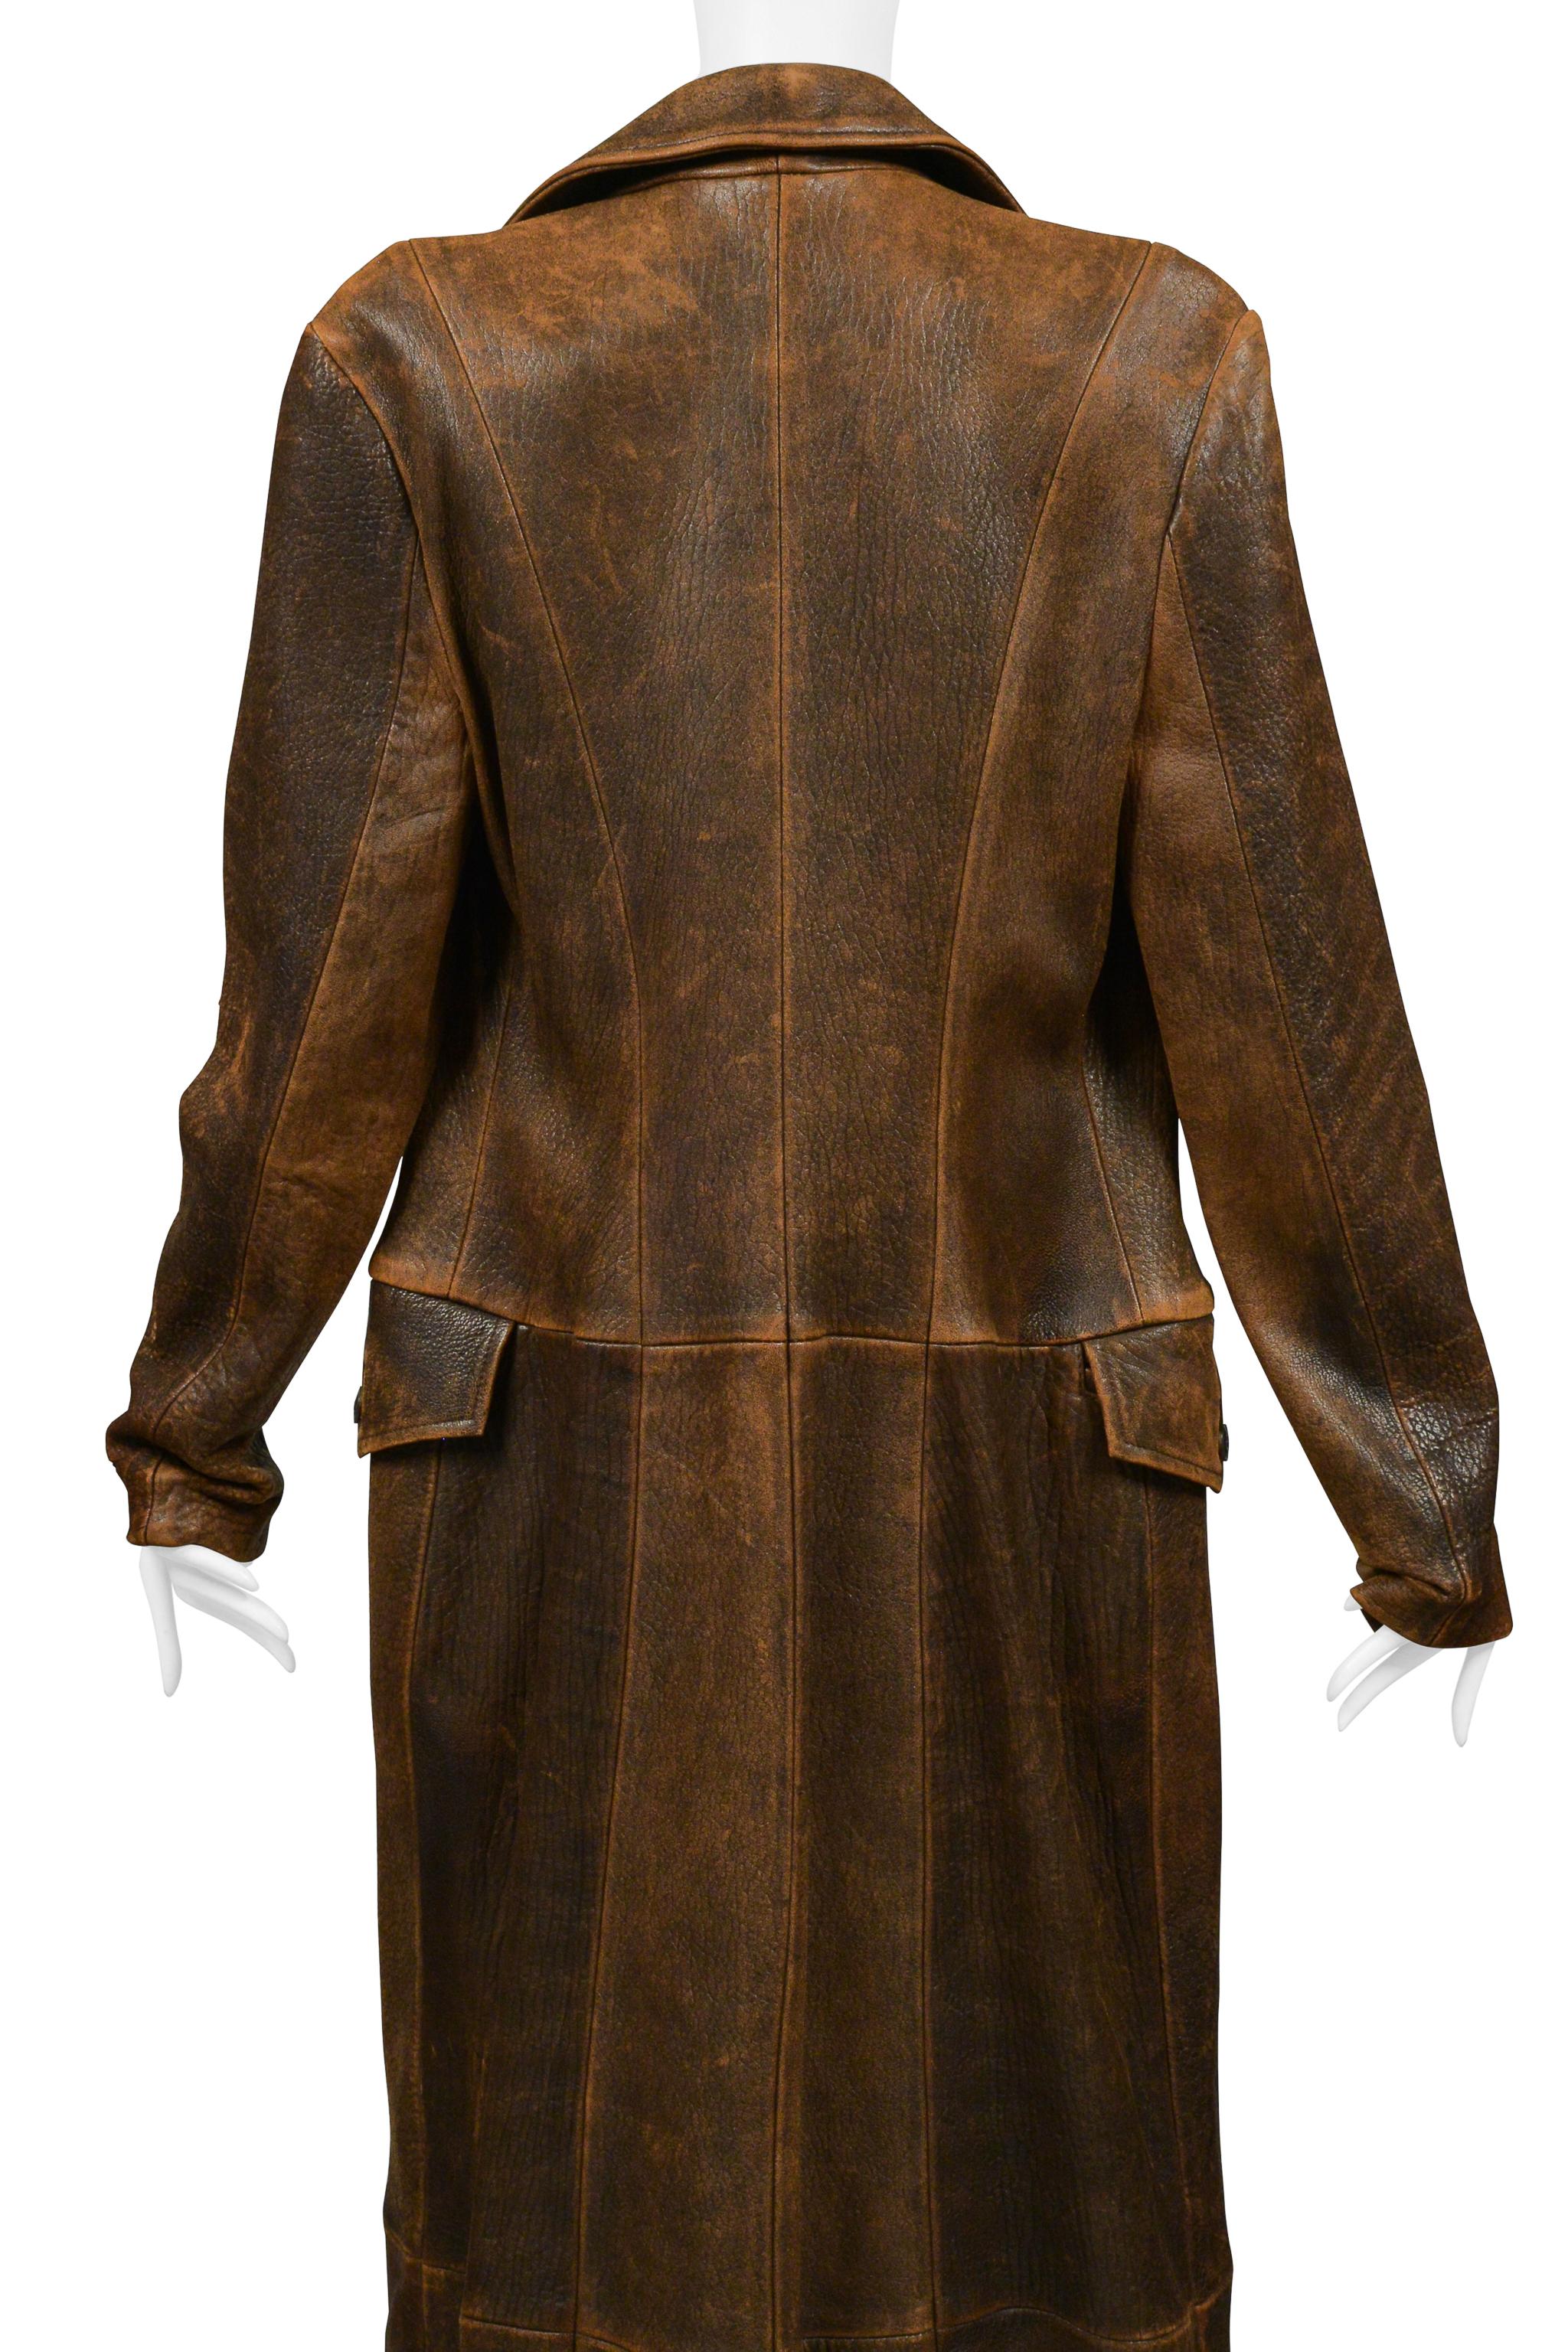 North Beach Leather Brown Distressed Duster For Sale 1